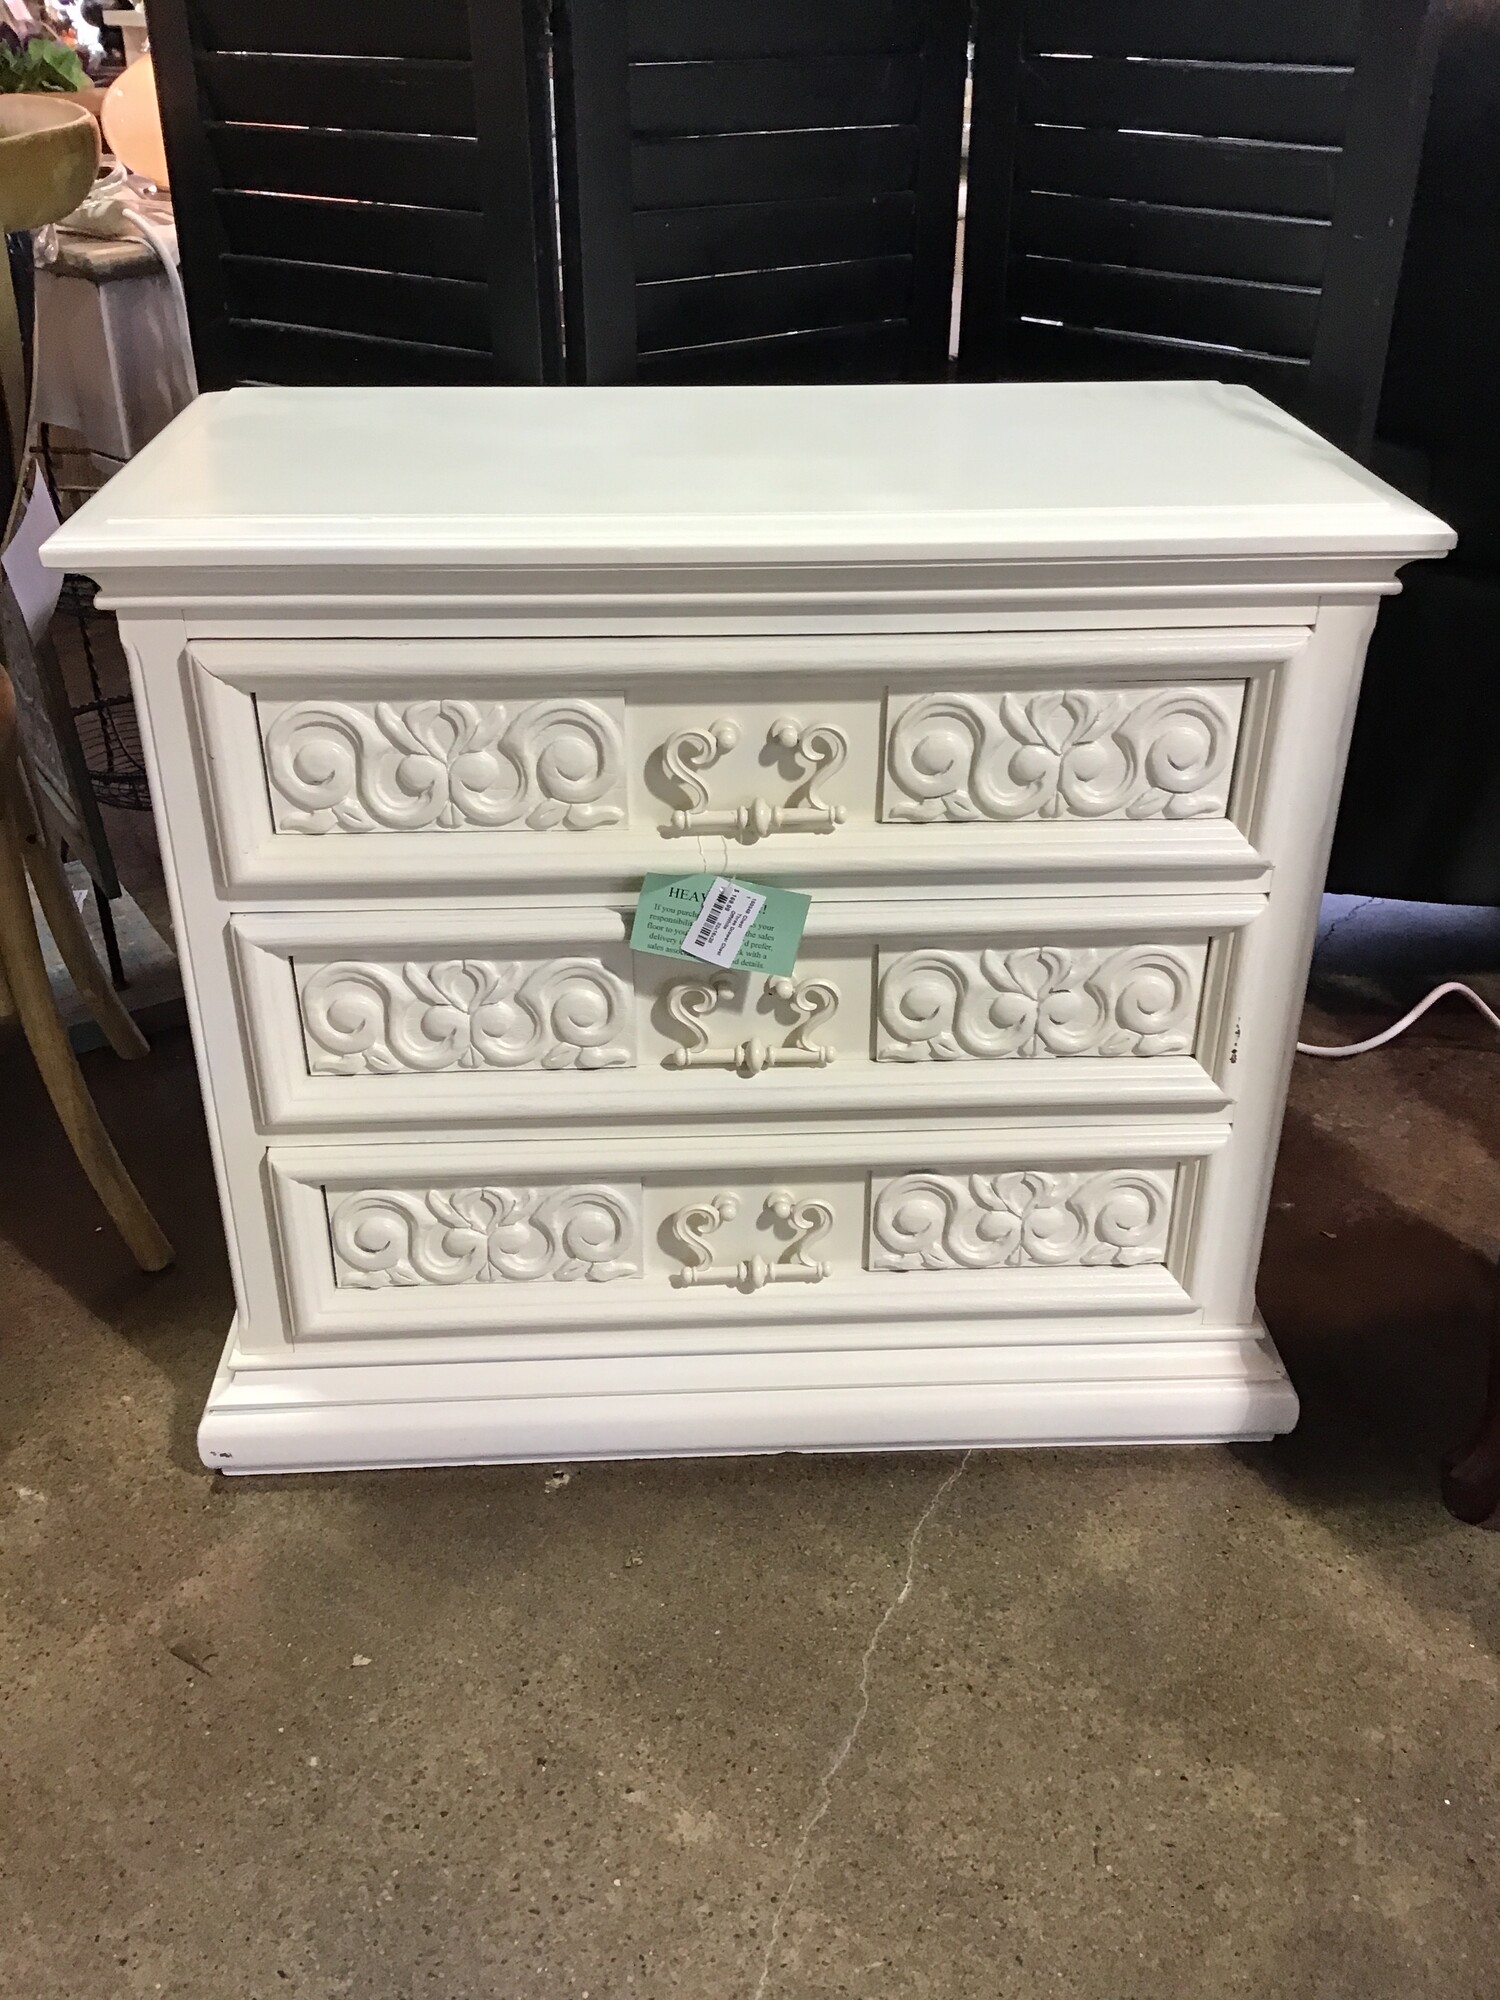 Three Drawer Chest
Painted Off White
Decorative drawer front
Chunky handles

DImensions: 32x16x28